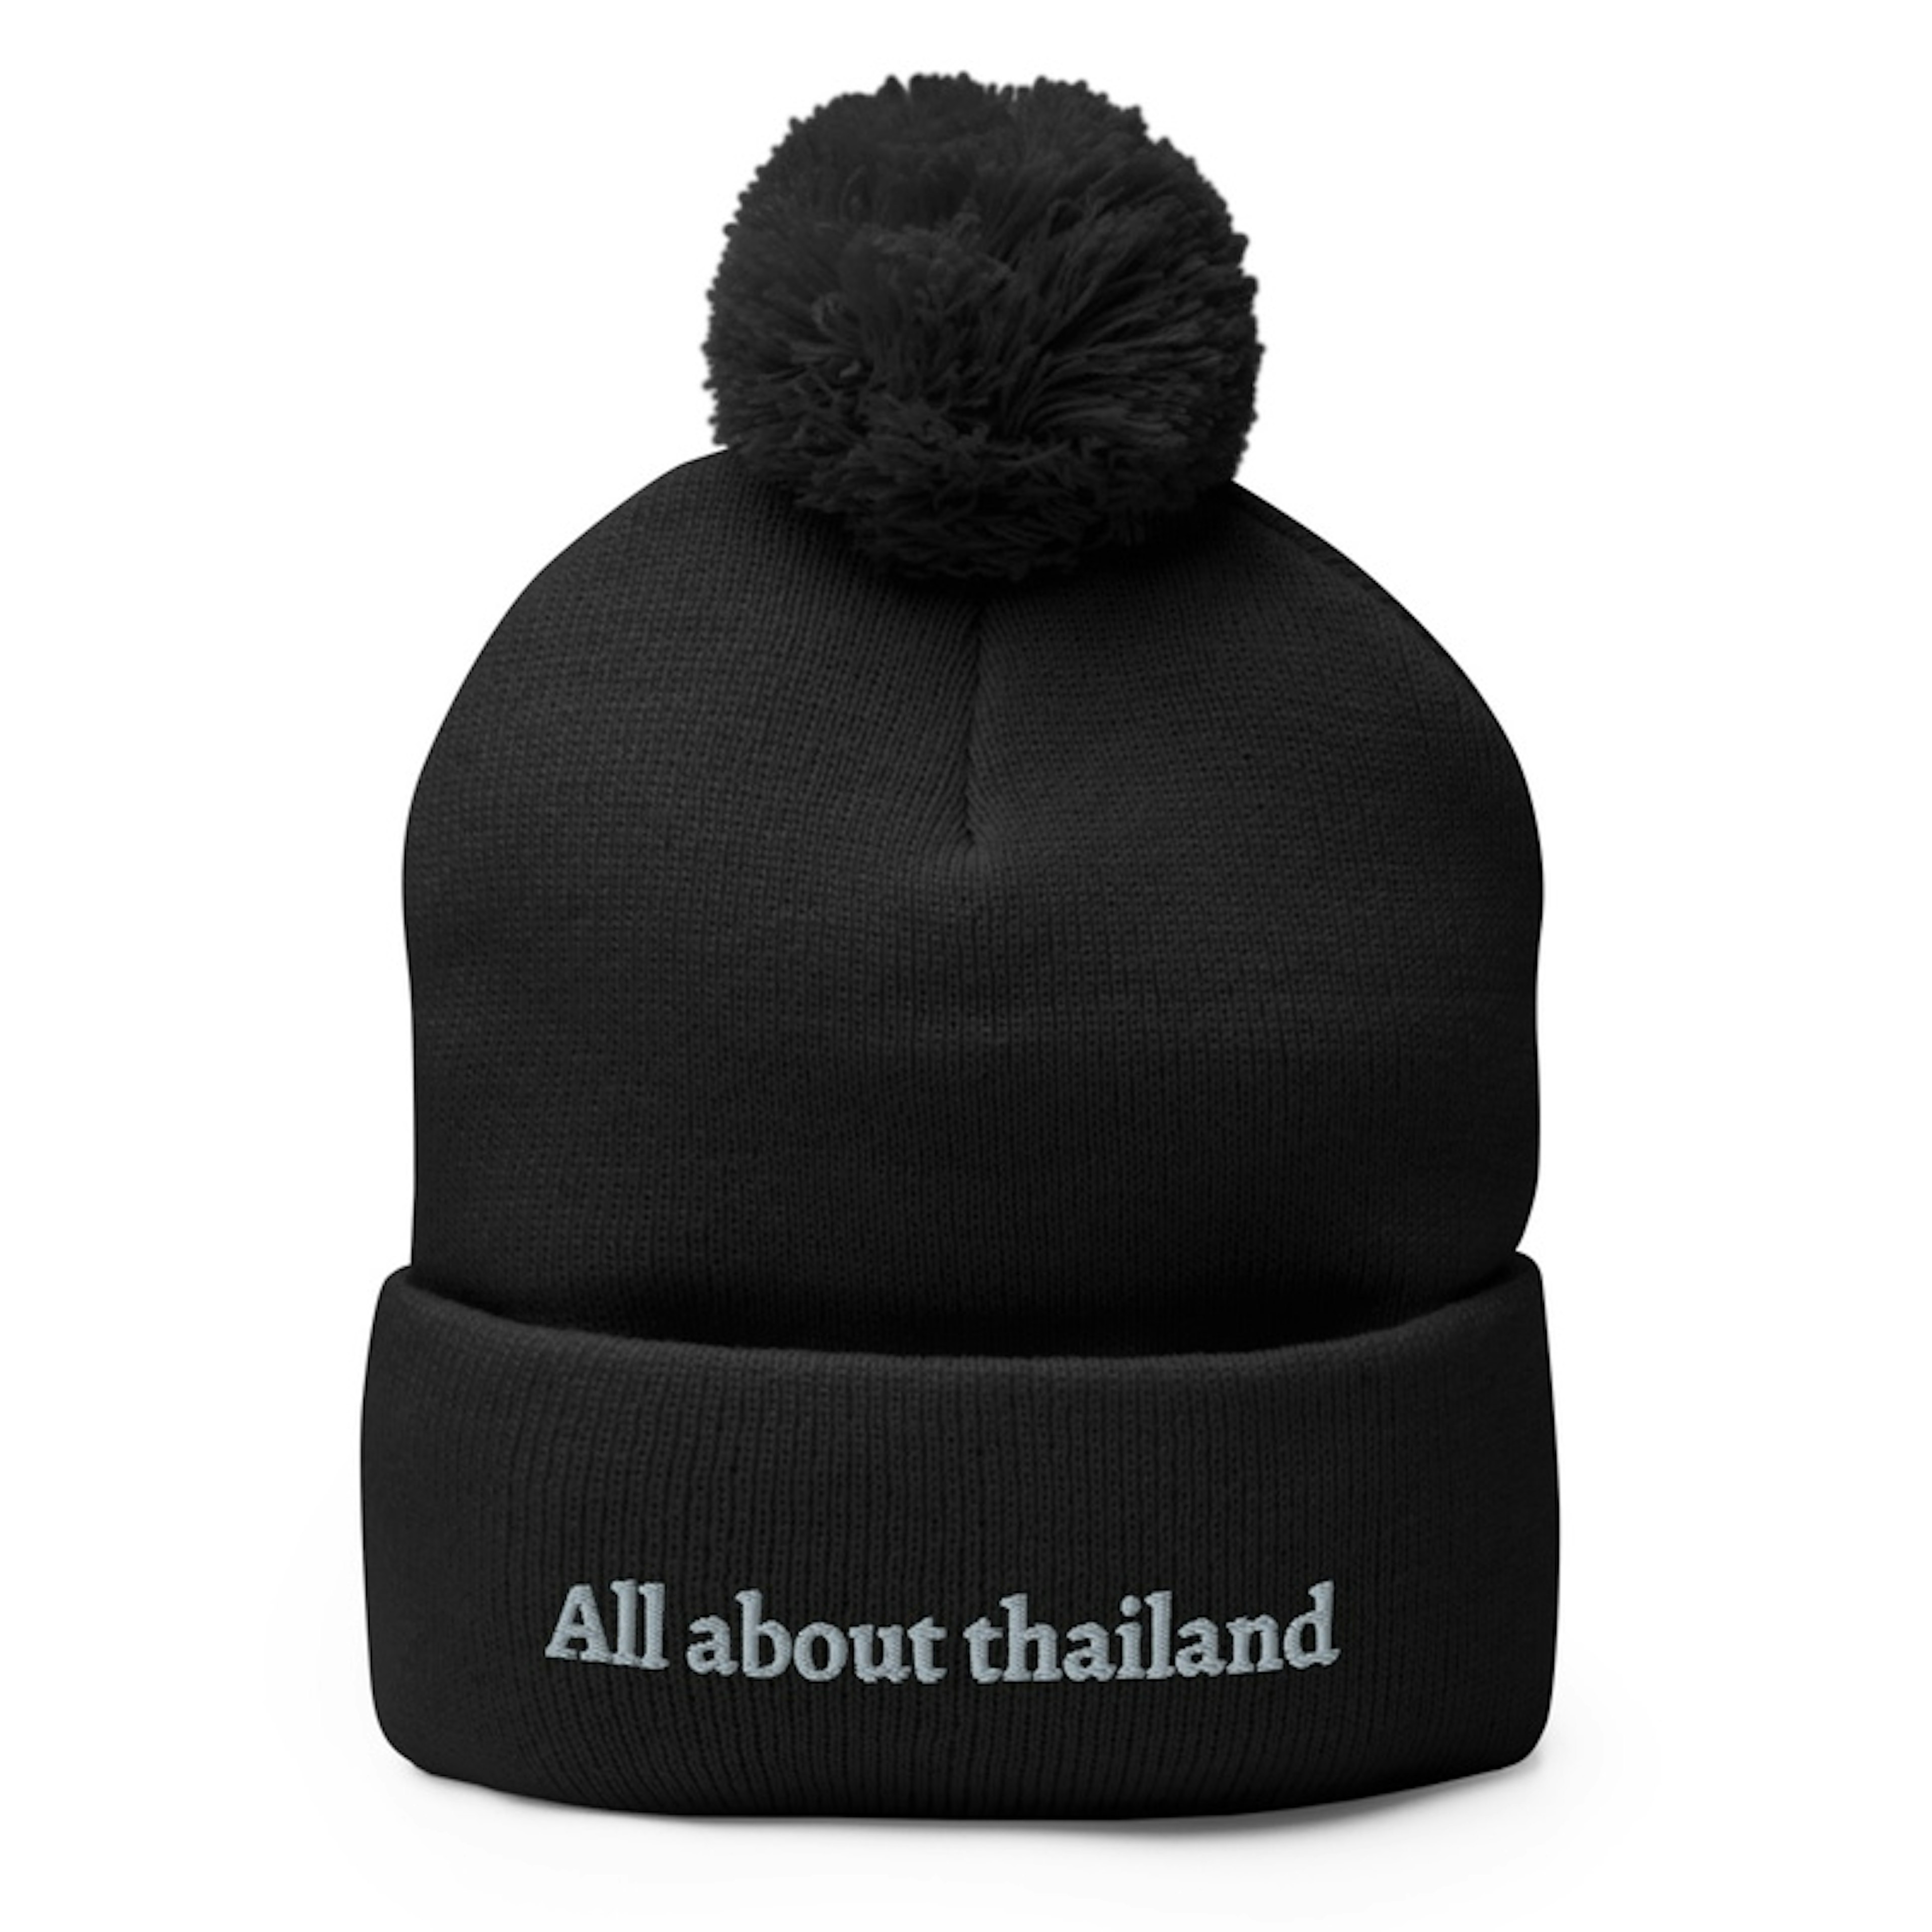 All about Thailand bobble hat